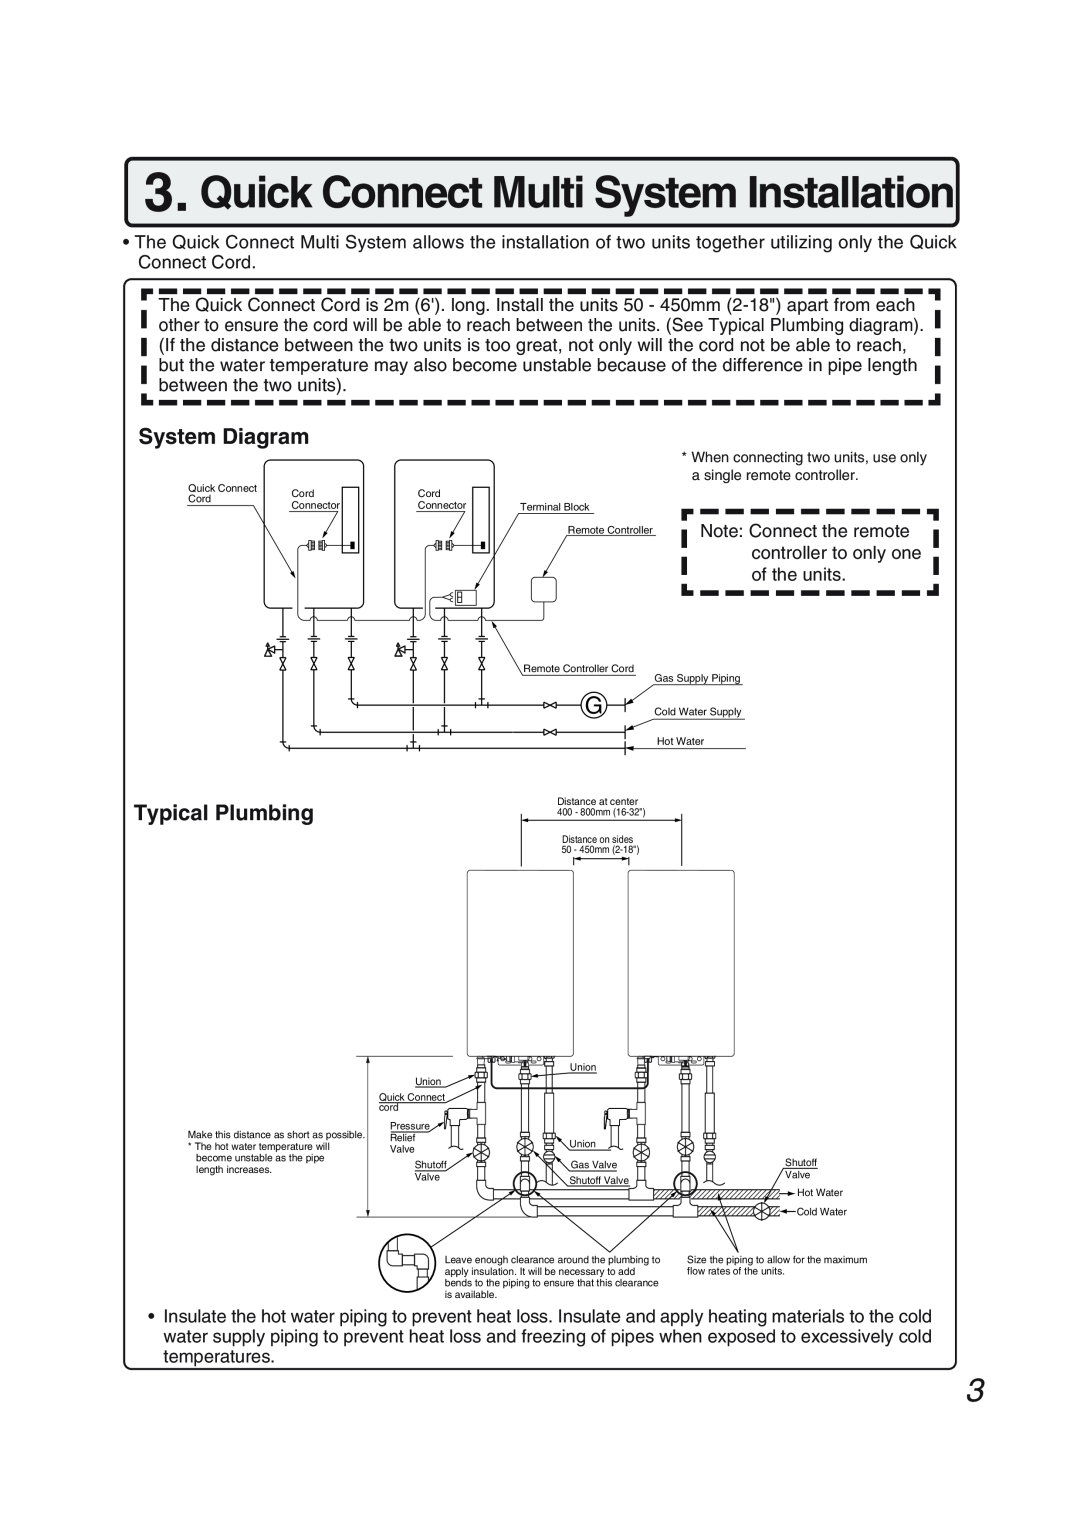 Pentax N-0751M-OD installation manual Quick Connect Multi System Installation, System Diagram, Typical Plumbing 